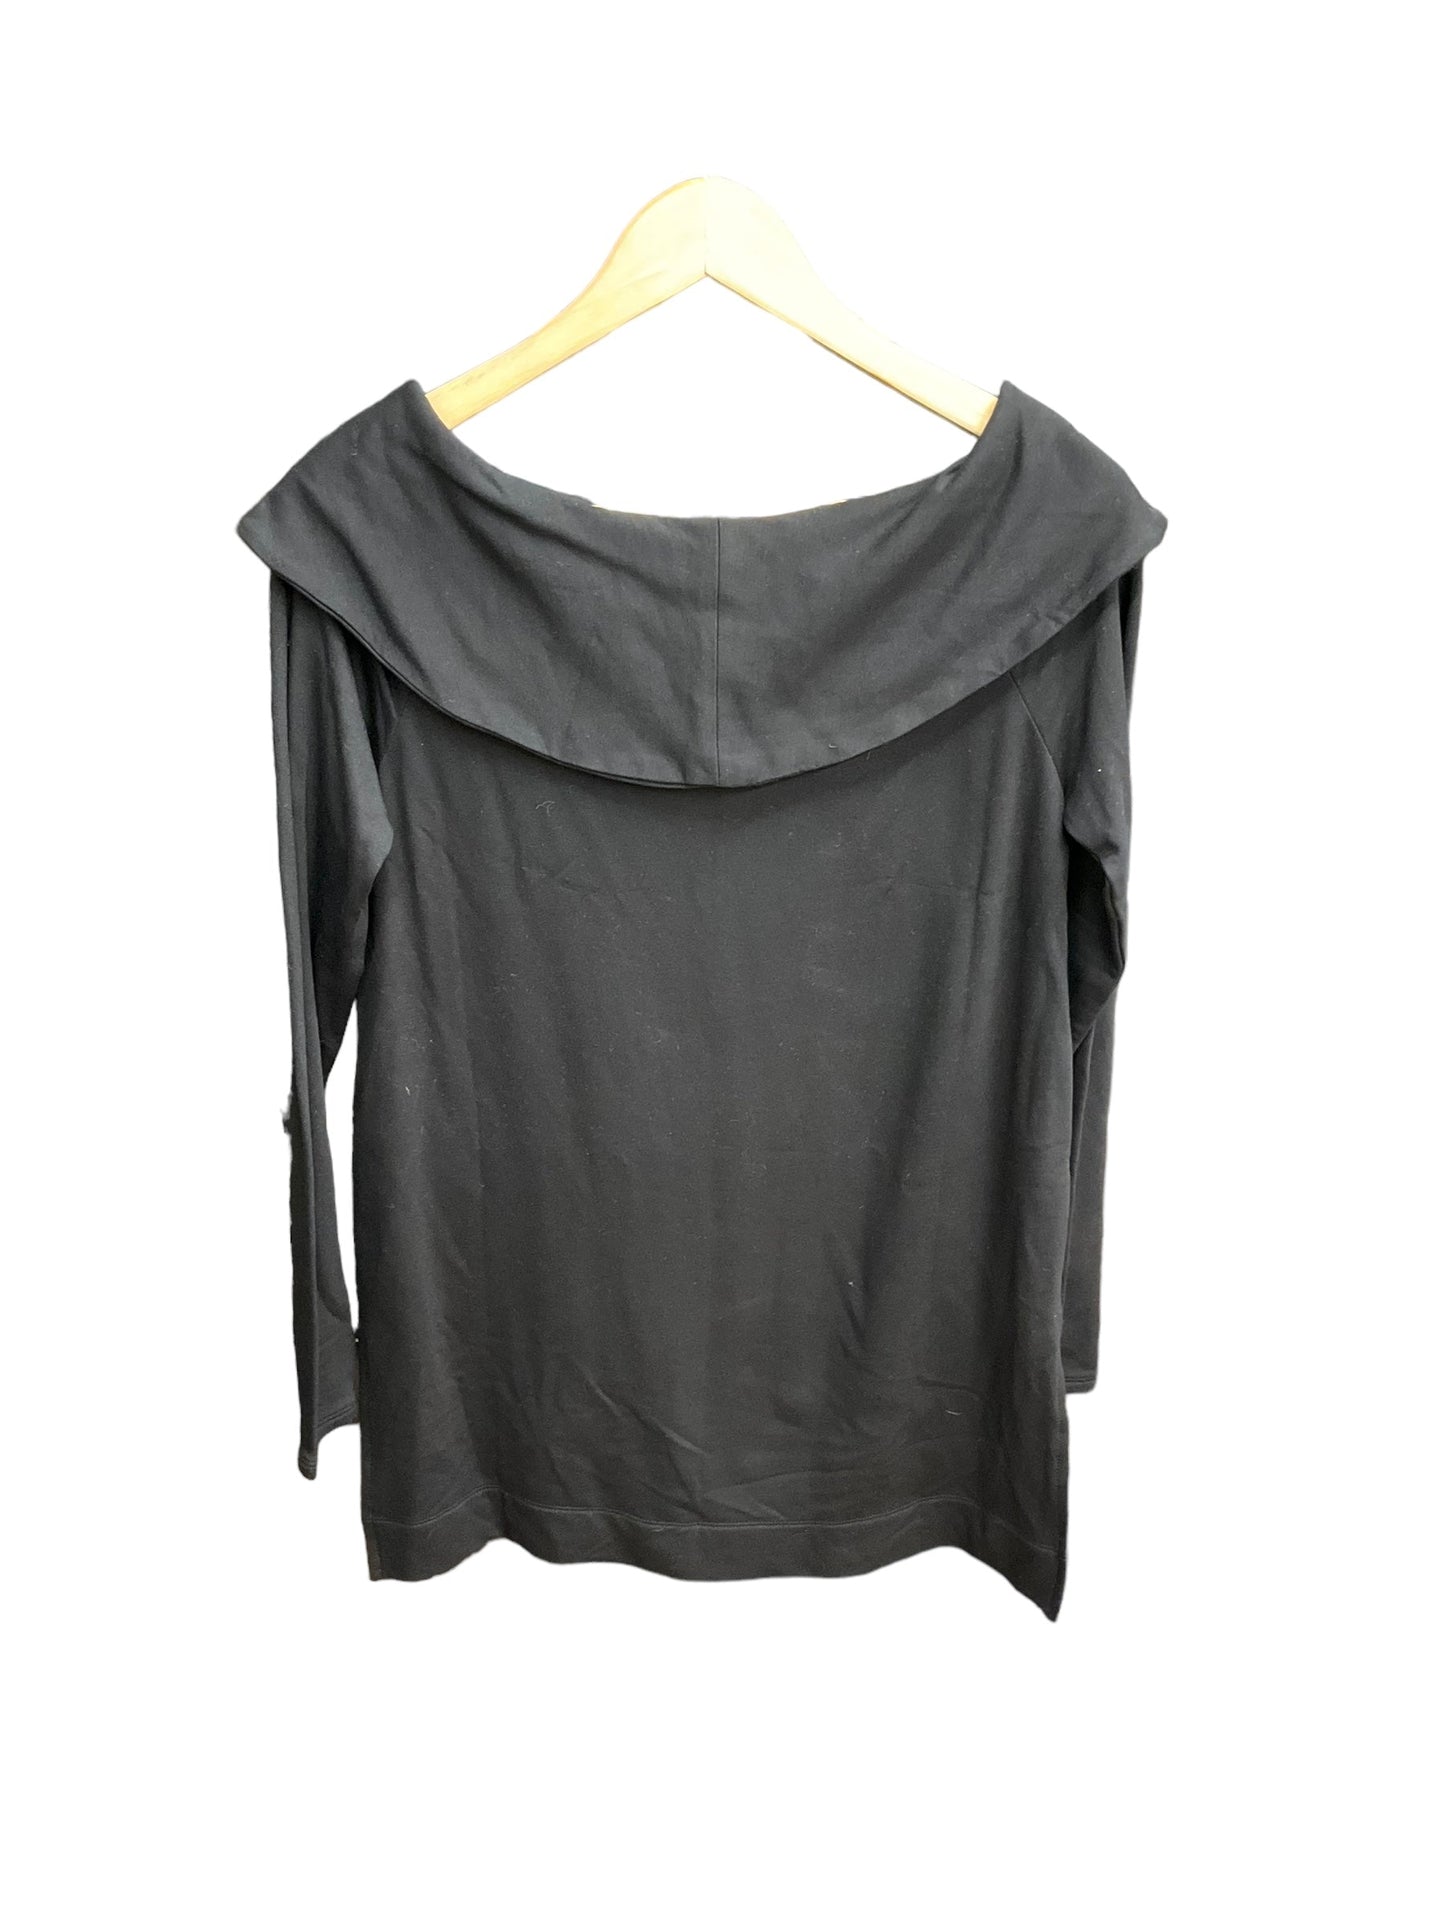 Black Top Long Sleeve Chicos, Size Xs